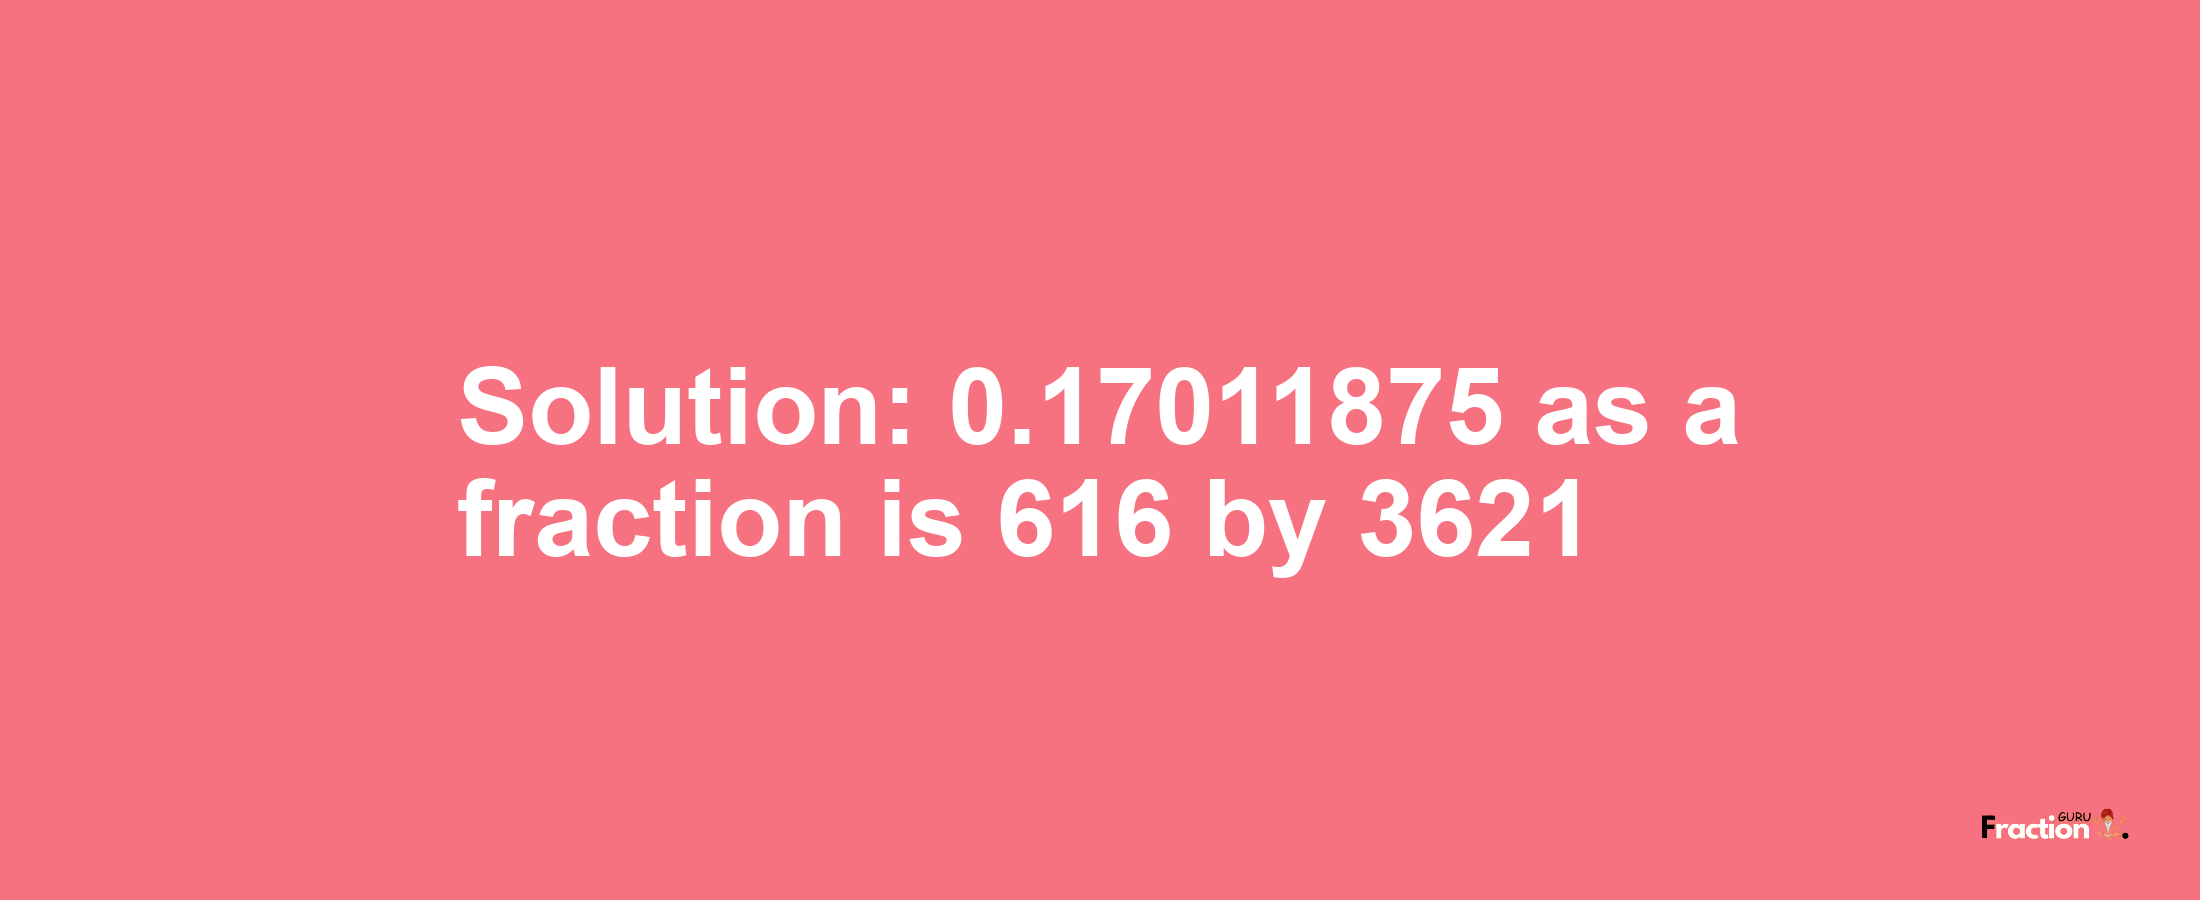 Solution:0.17011875 as a fraction is 616/3621